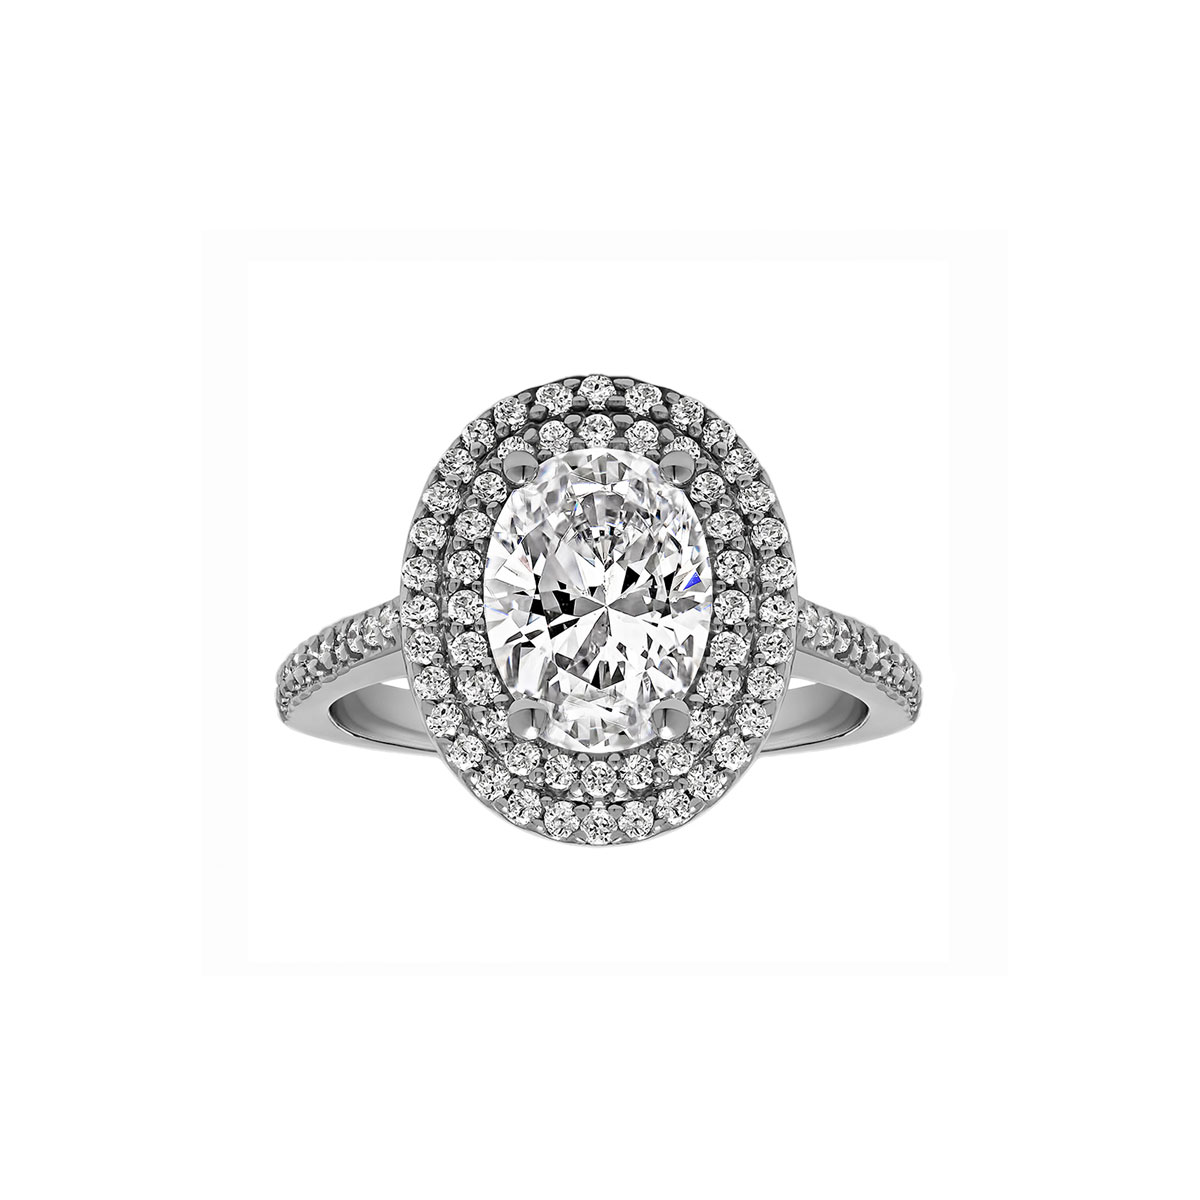 1 ctw, 14K White Gold Oval Cut Double Halo Diamond Engagement Ring ...